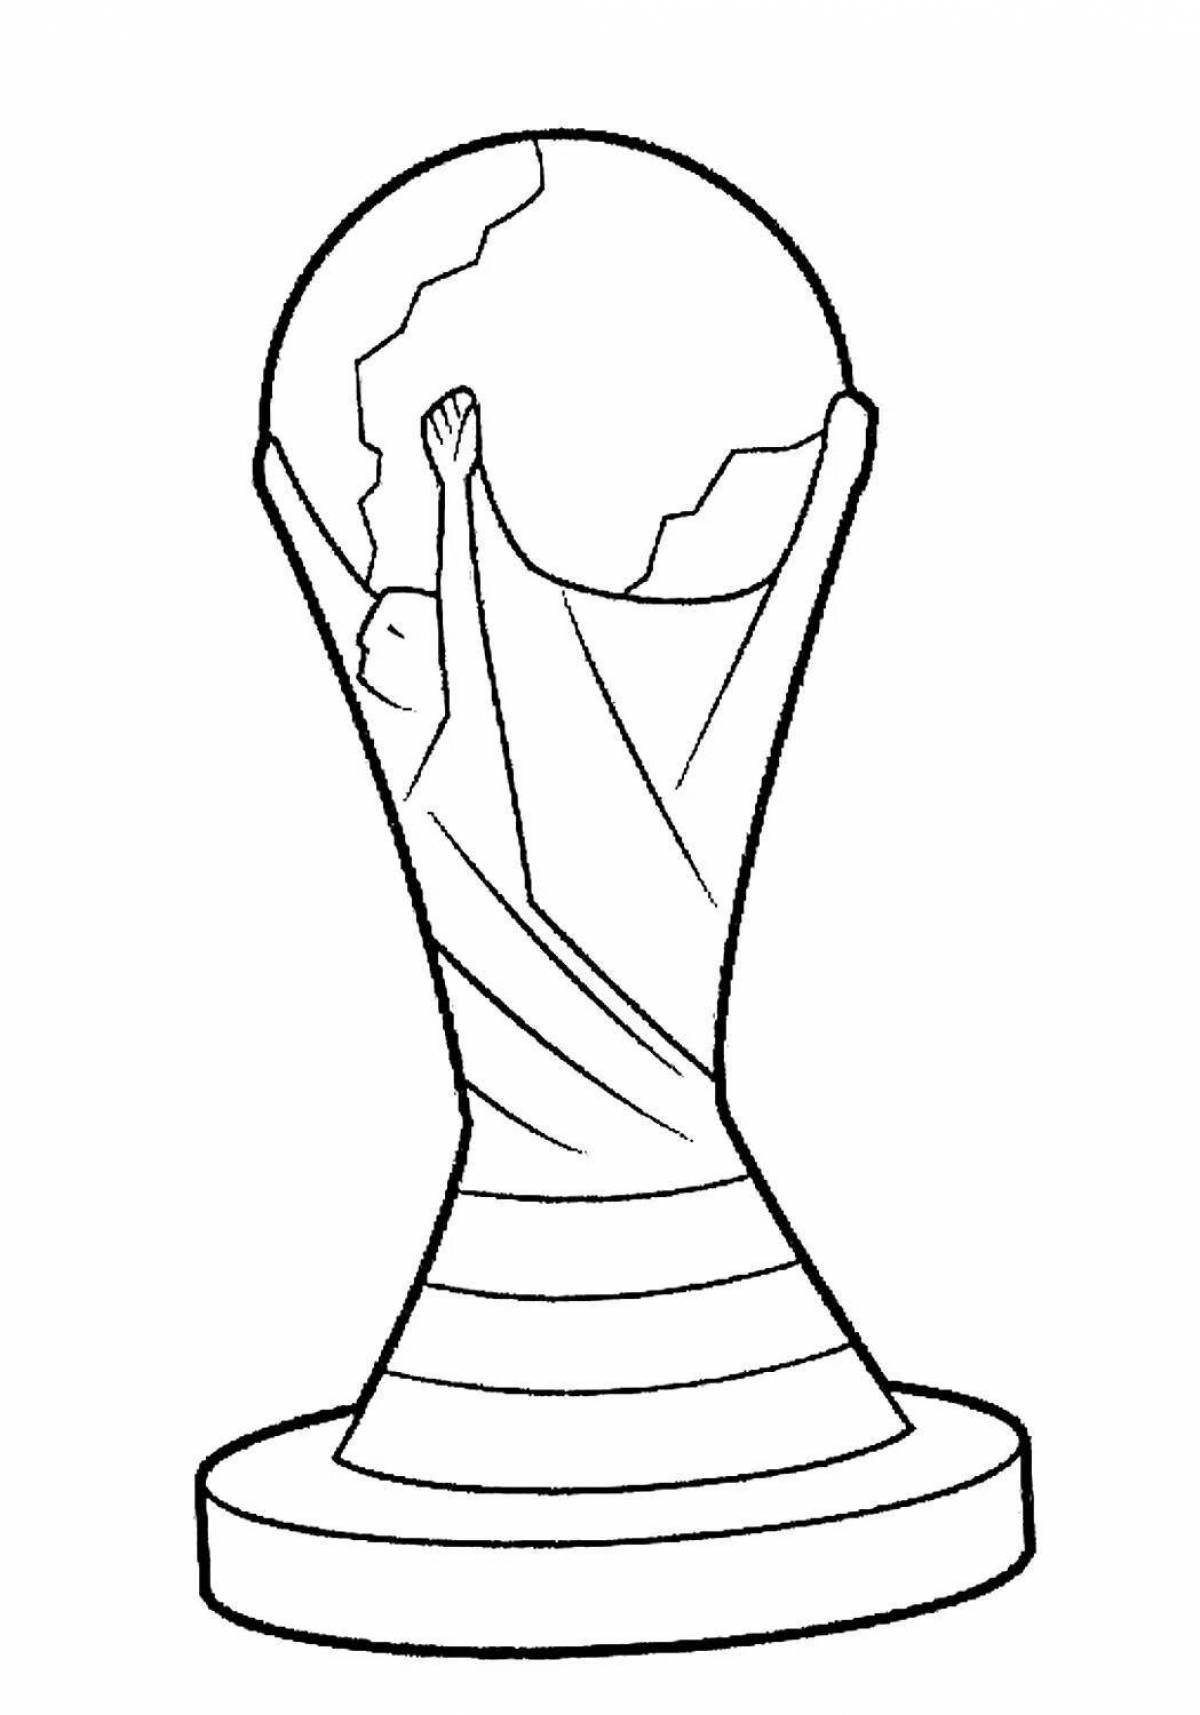 Football World Cup holiday coloring page